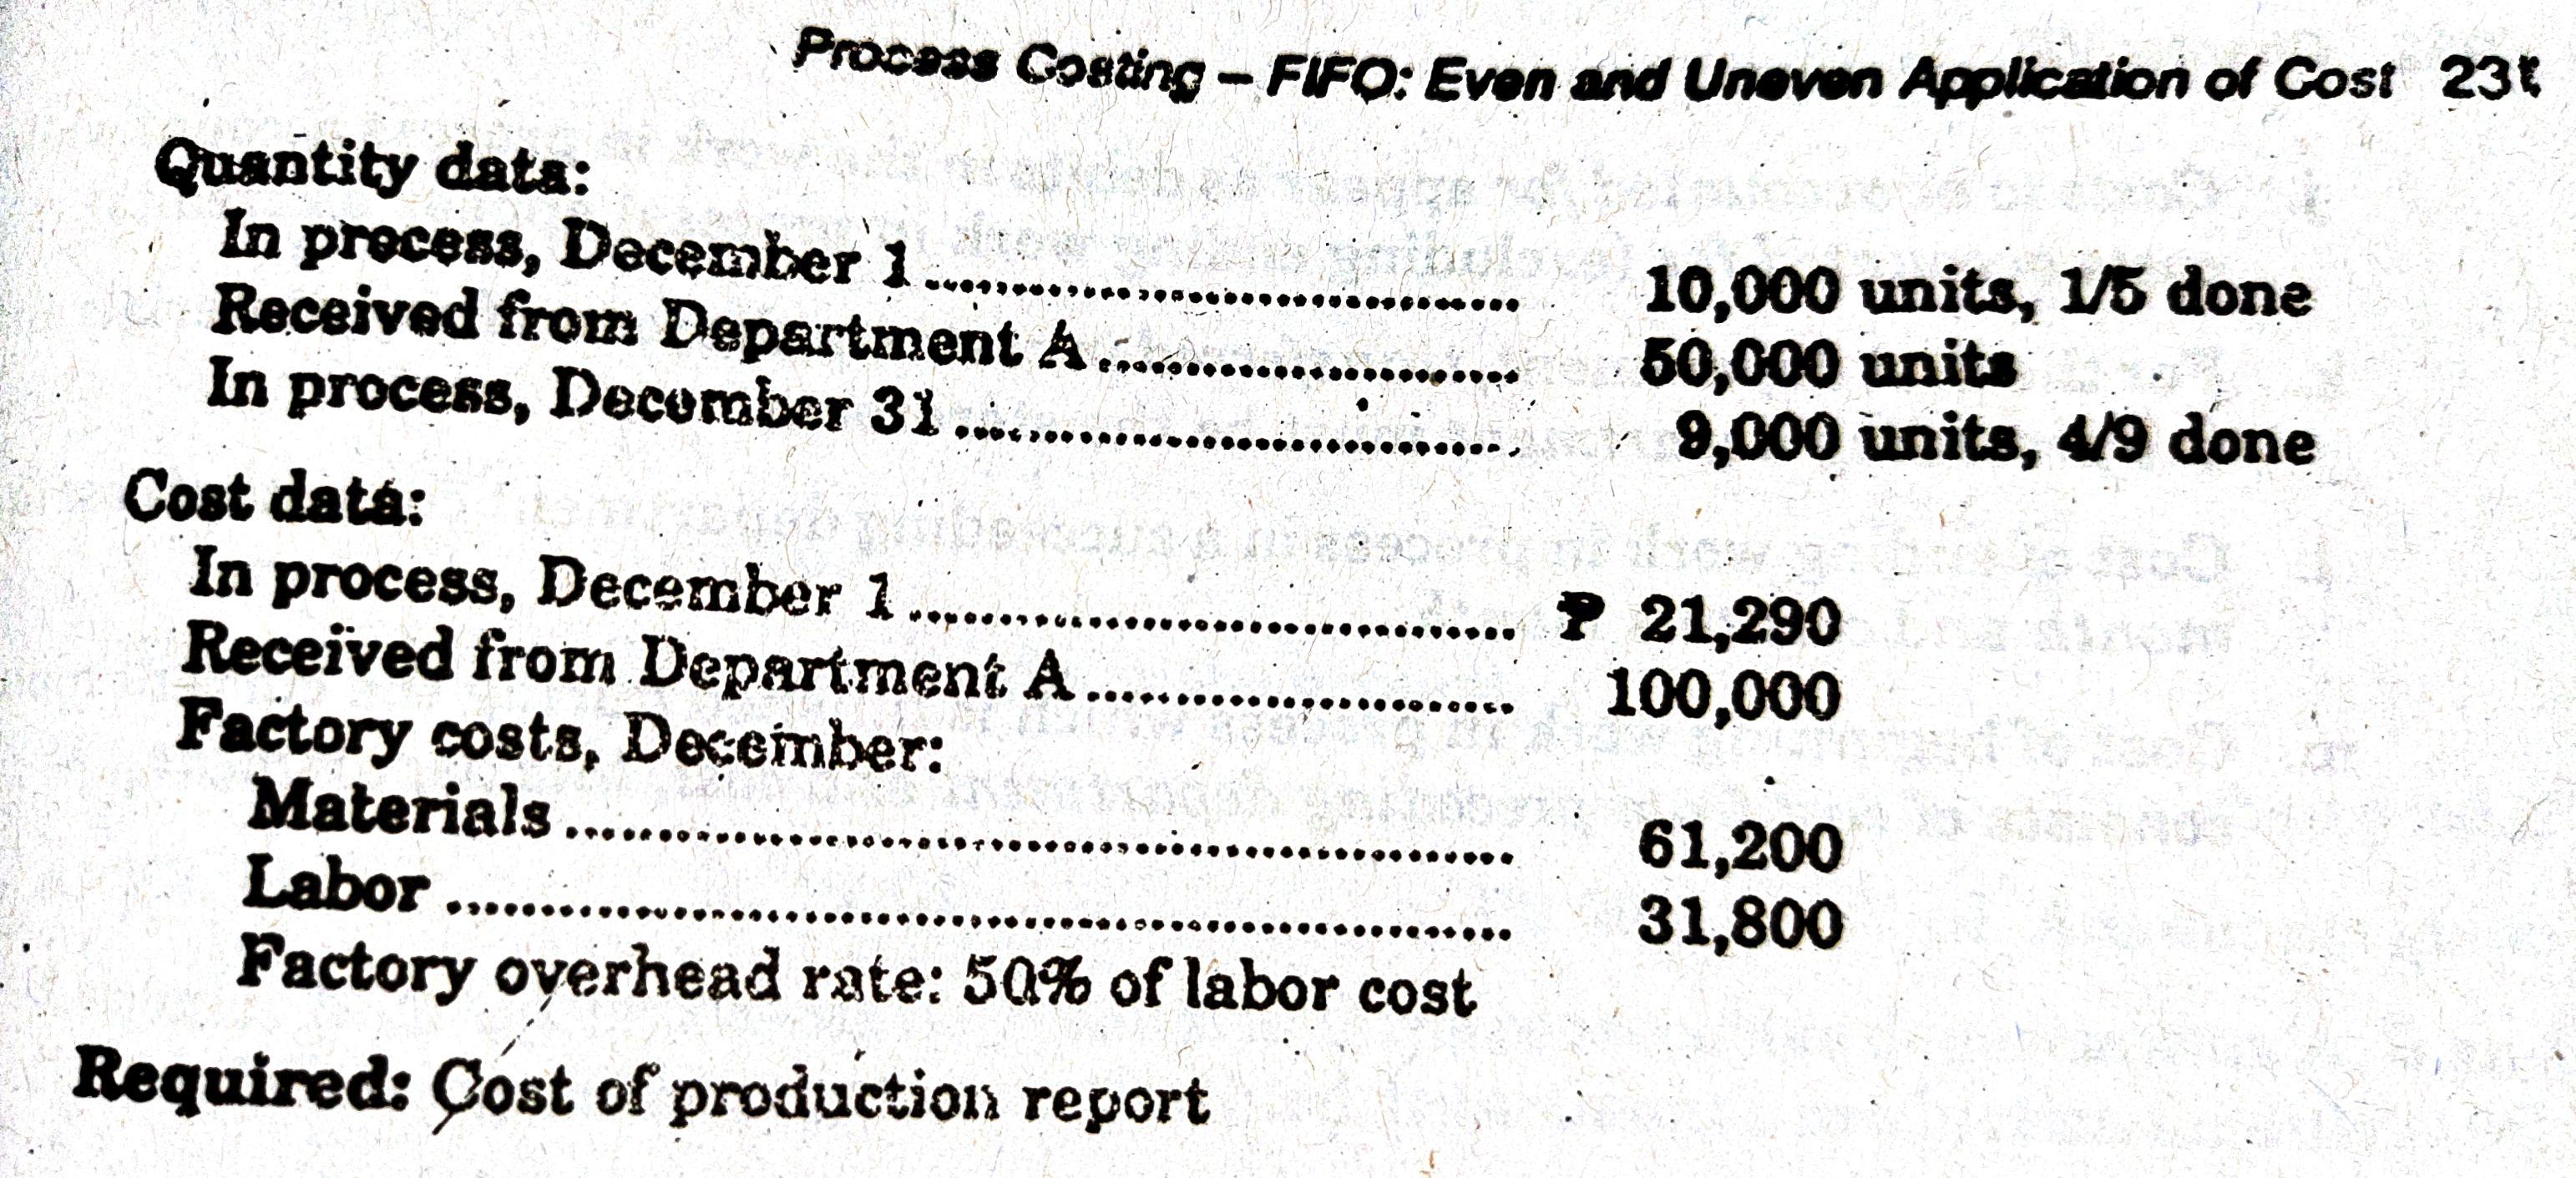 Process Costing - FIFQ: Even and Uneven Application of Cost 23% Quantity data: In process, December 1